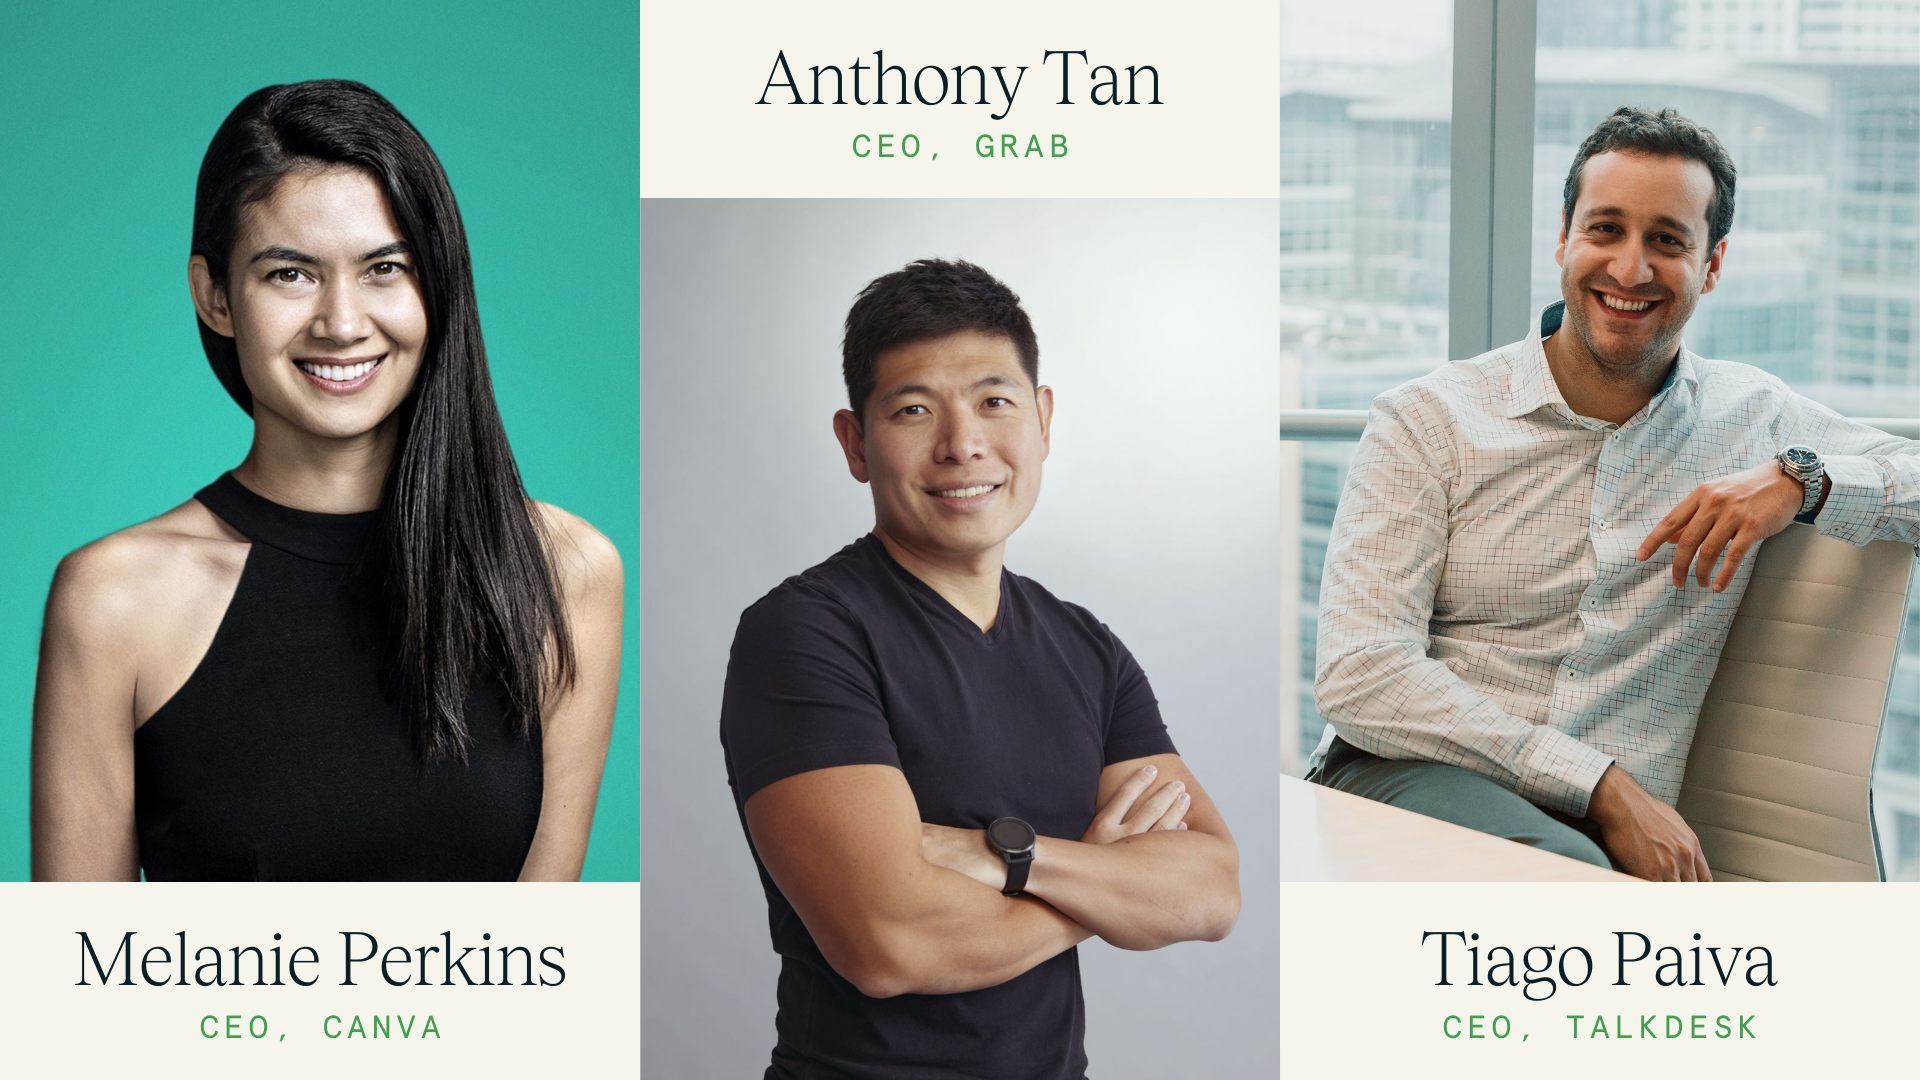 The CEOs of Canva, Grab and Talkdesk, Melanie Perkins, Anthont Tan and Tiago Paiva